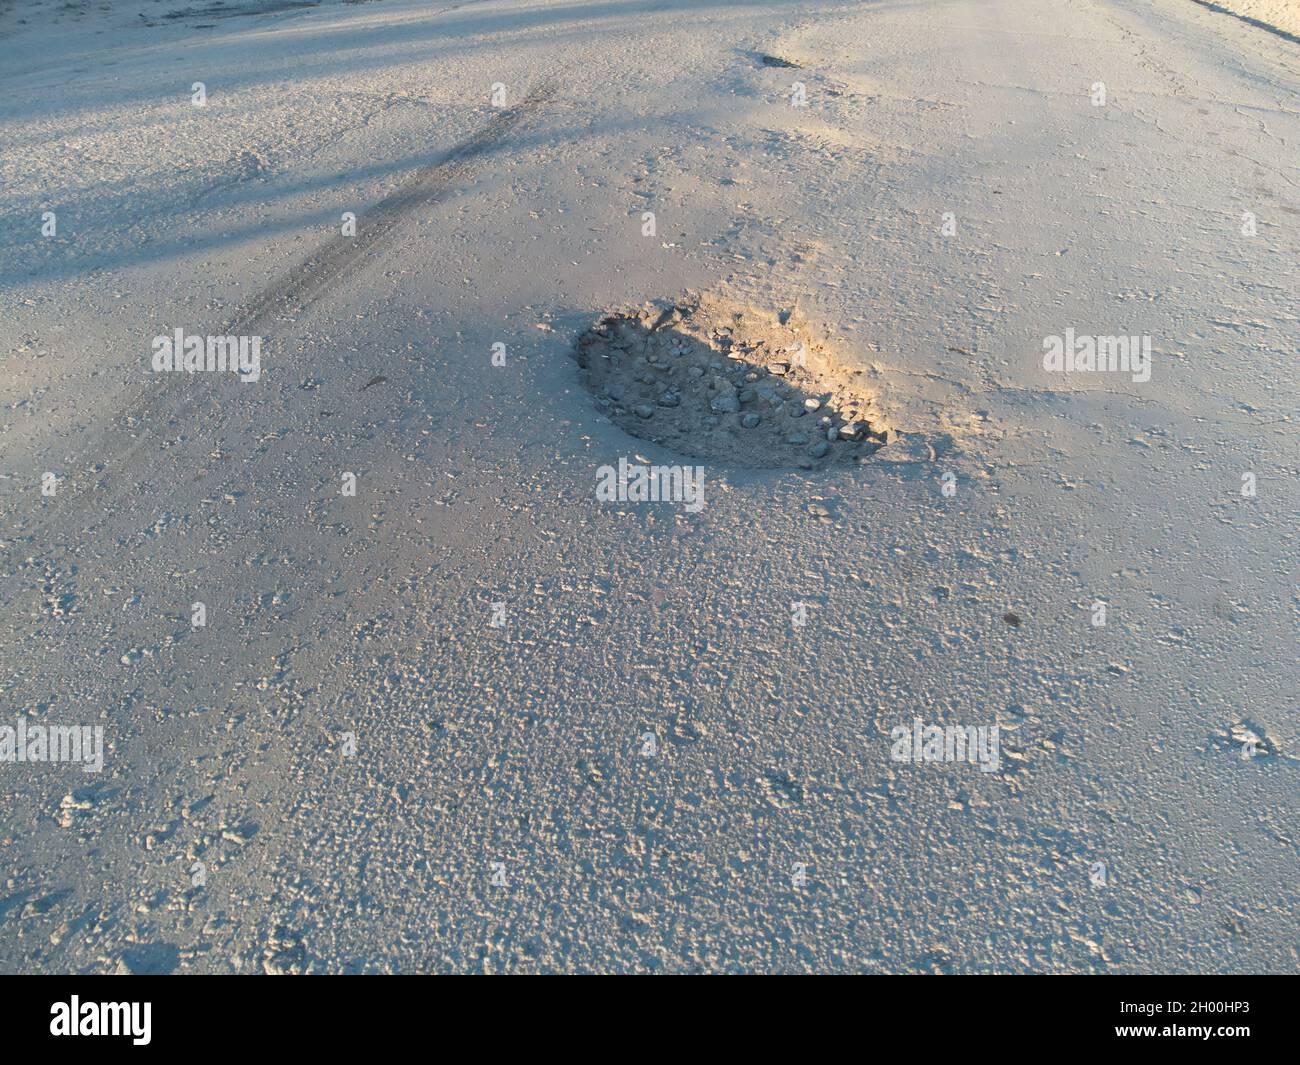 Pothole on the asphalt. A pit formed on the road surface. Stock Photo